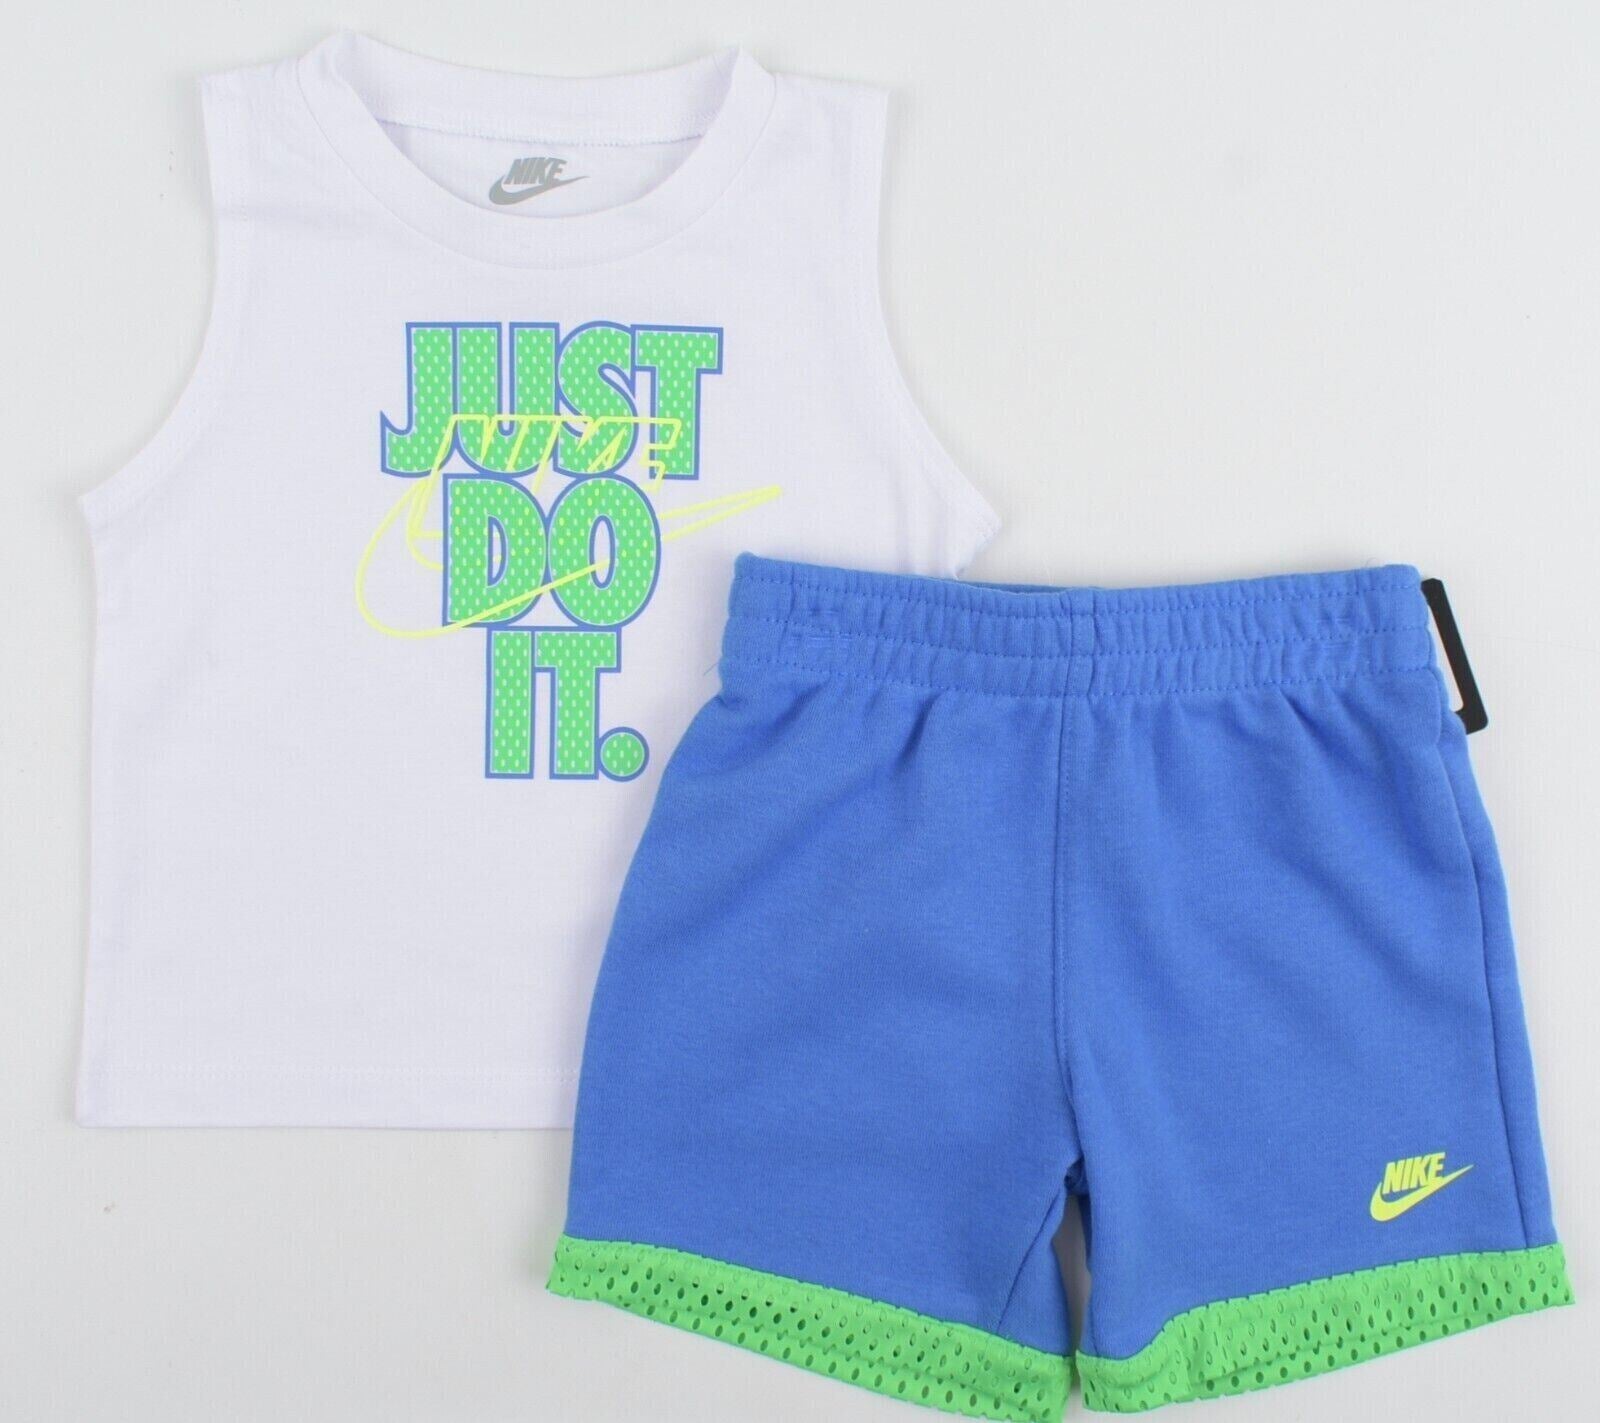 NIKE Baby Boys' 2-pc Summer Outfit Set, Top+Shorts, White/Blue, size 12 months